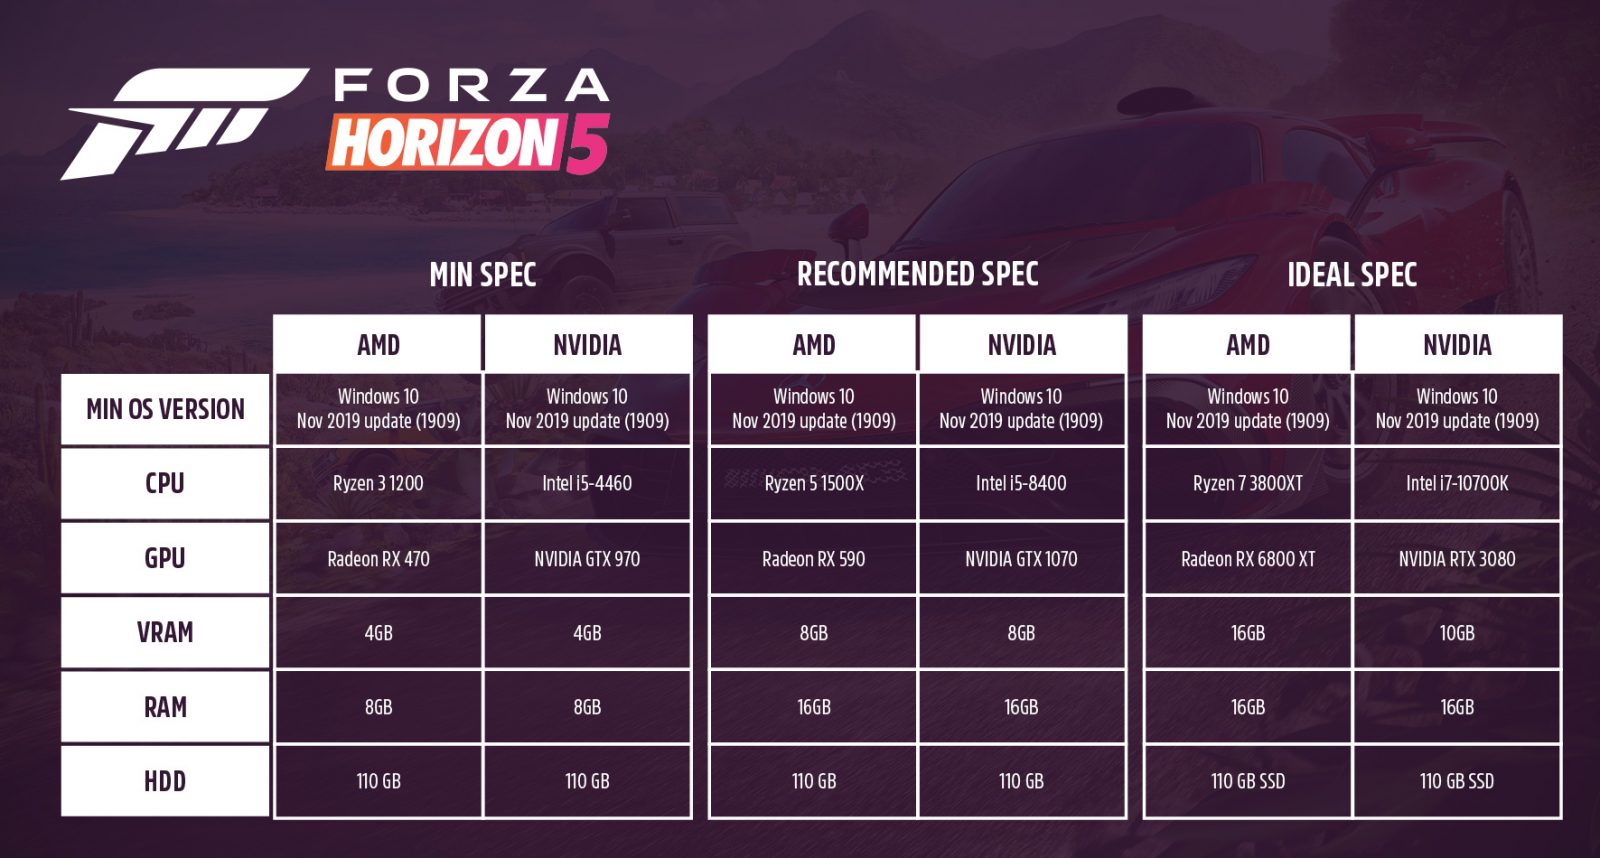 Forza Horizon 5 on PC: System requirements, specs, ray tracing